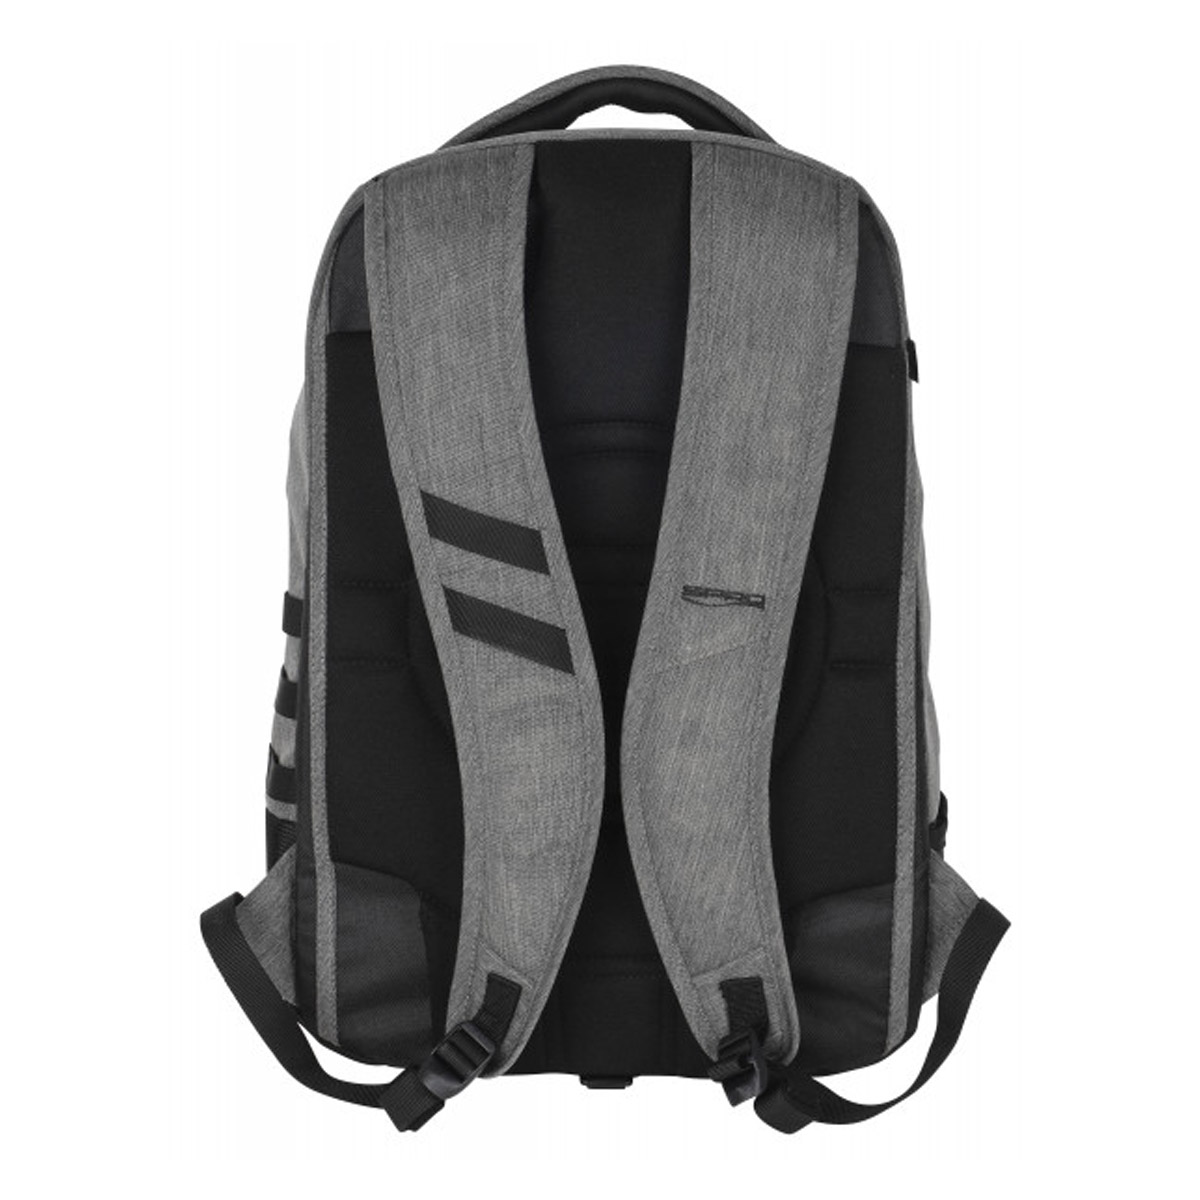 Spro Freestyle Backpack 22